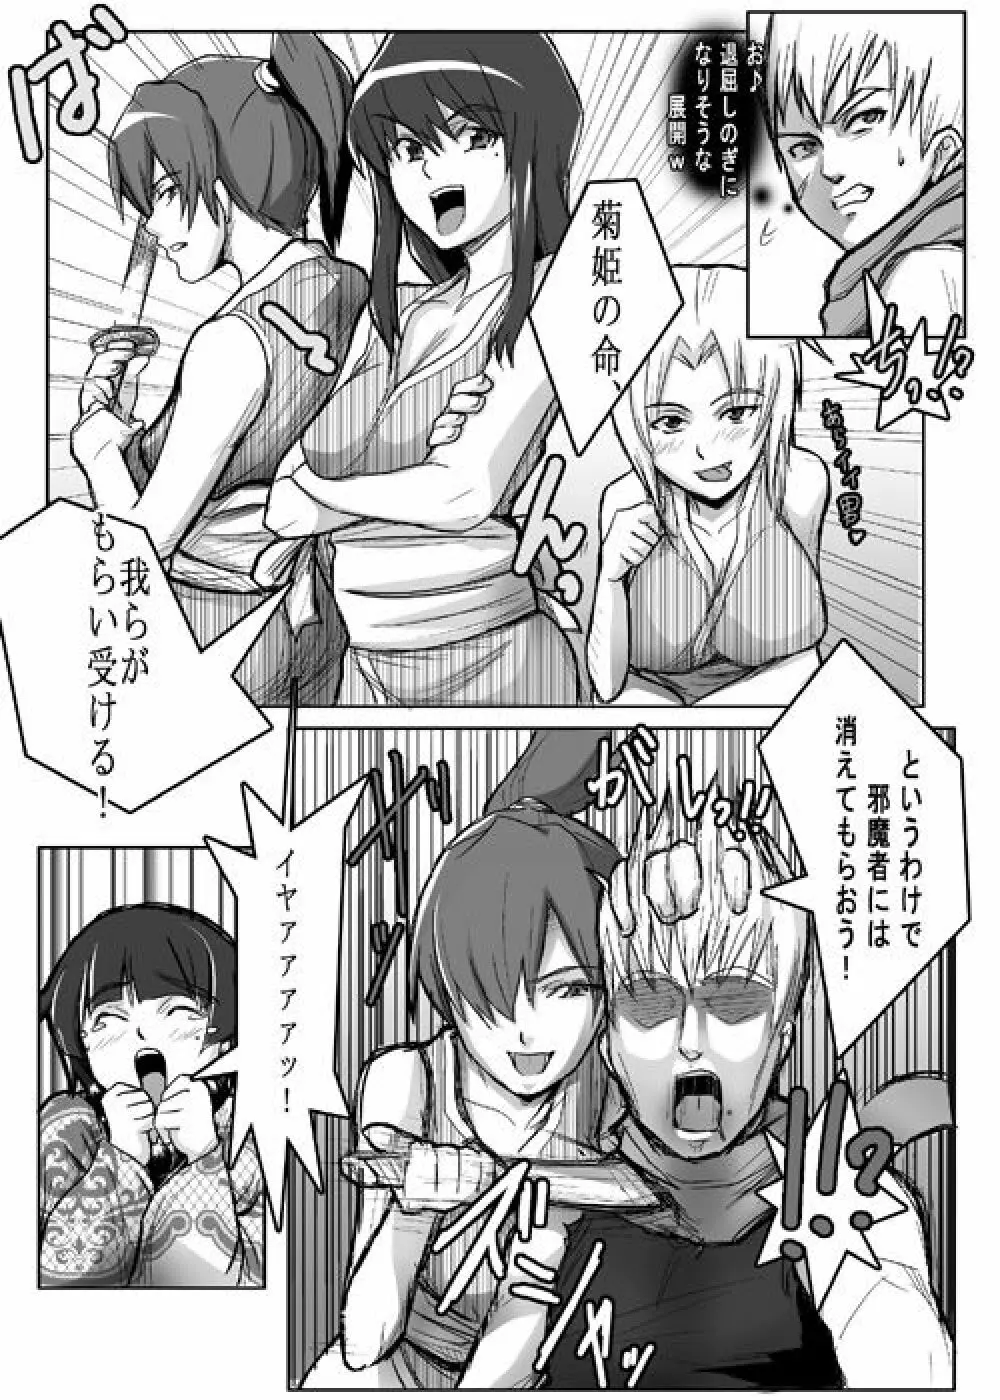 Same-themed manga about kid fighting female ninjas from japanese imageboard. Page.51